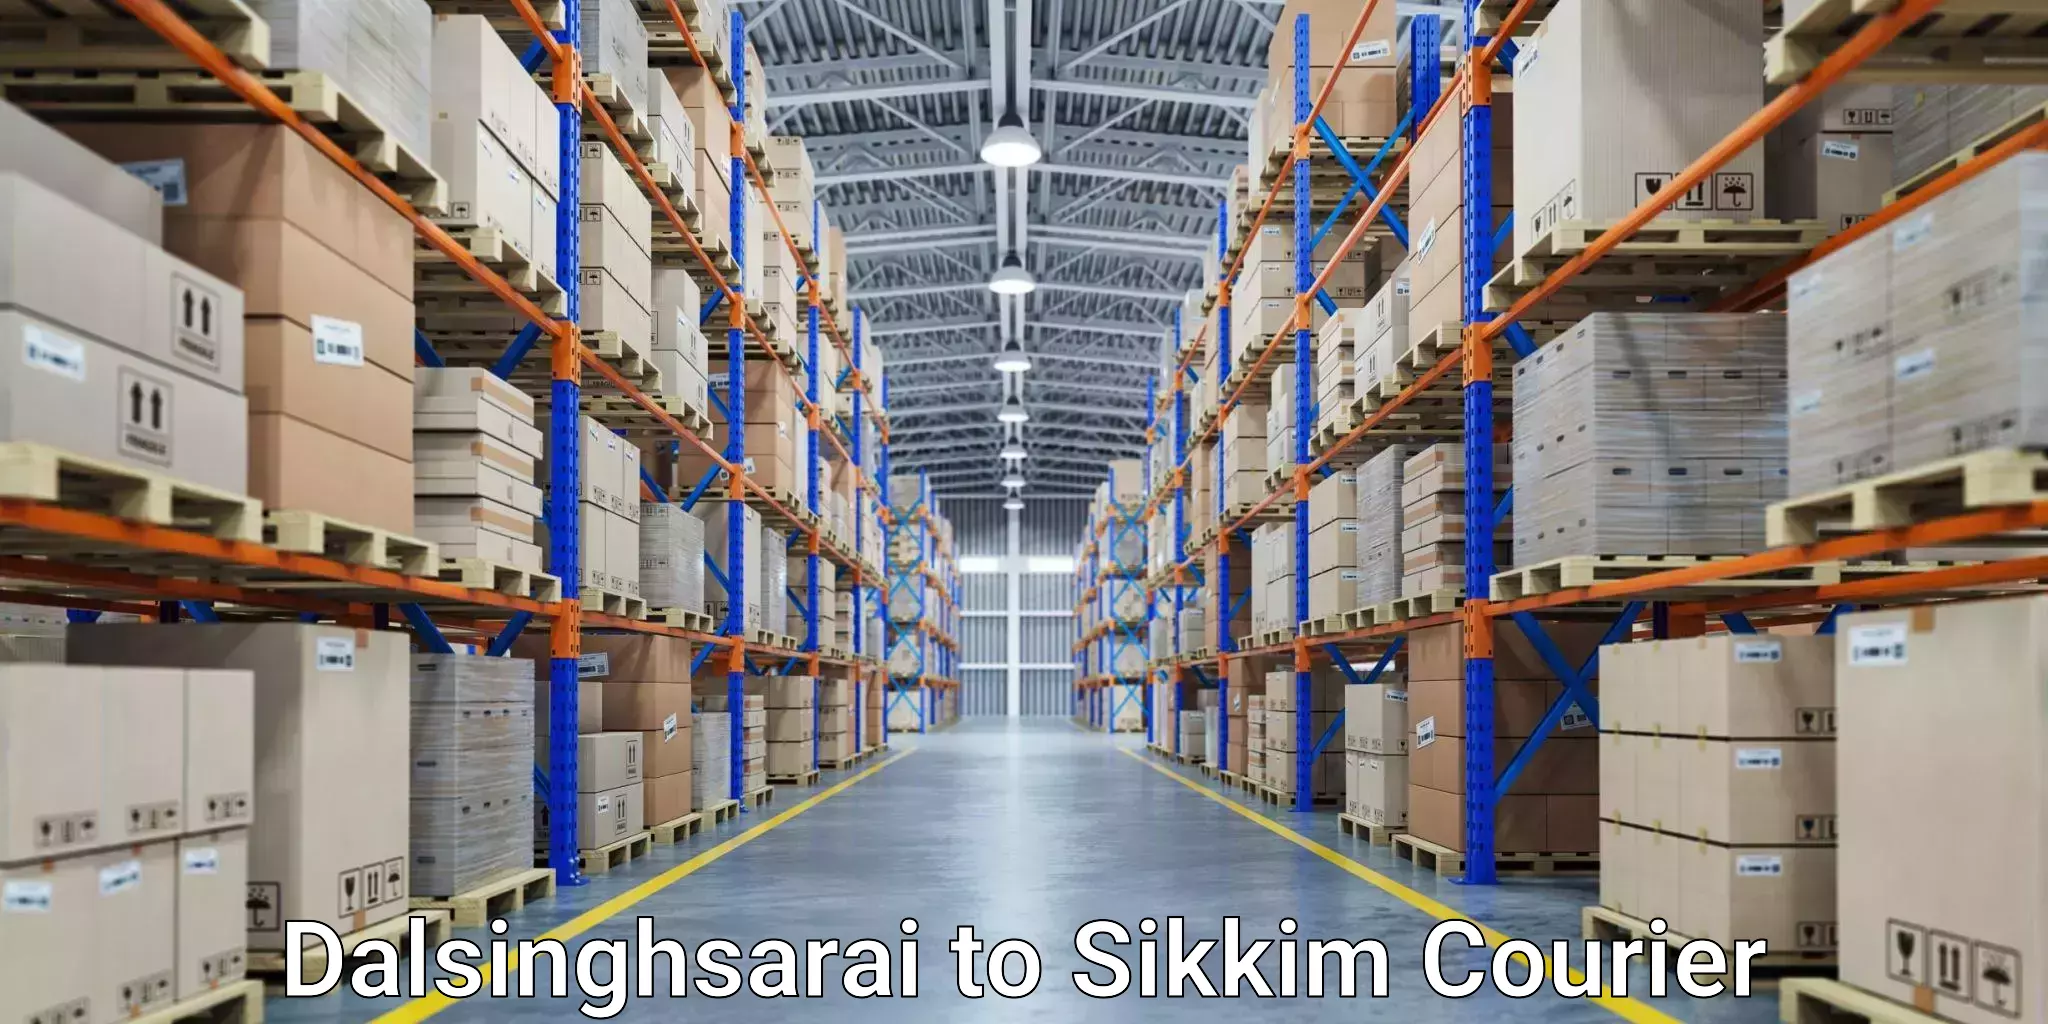 Same-day delivery solutions Dalsinghsarai to Sikkim